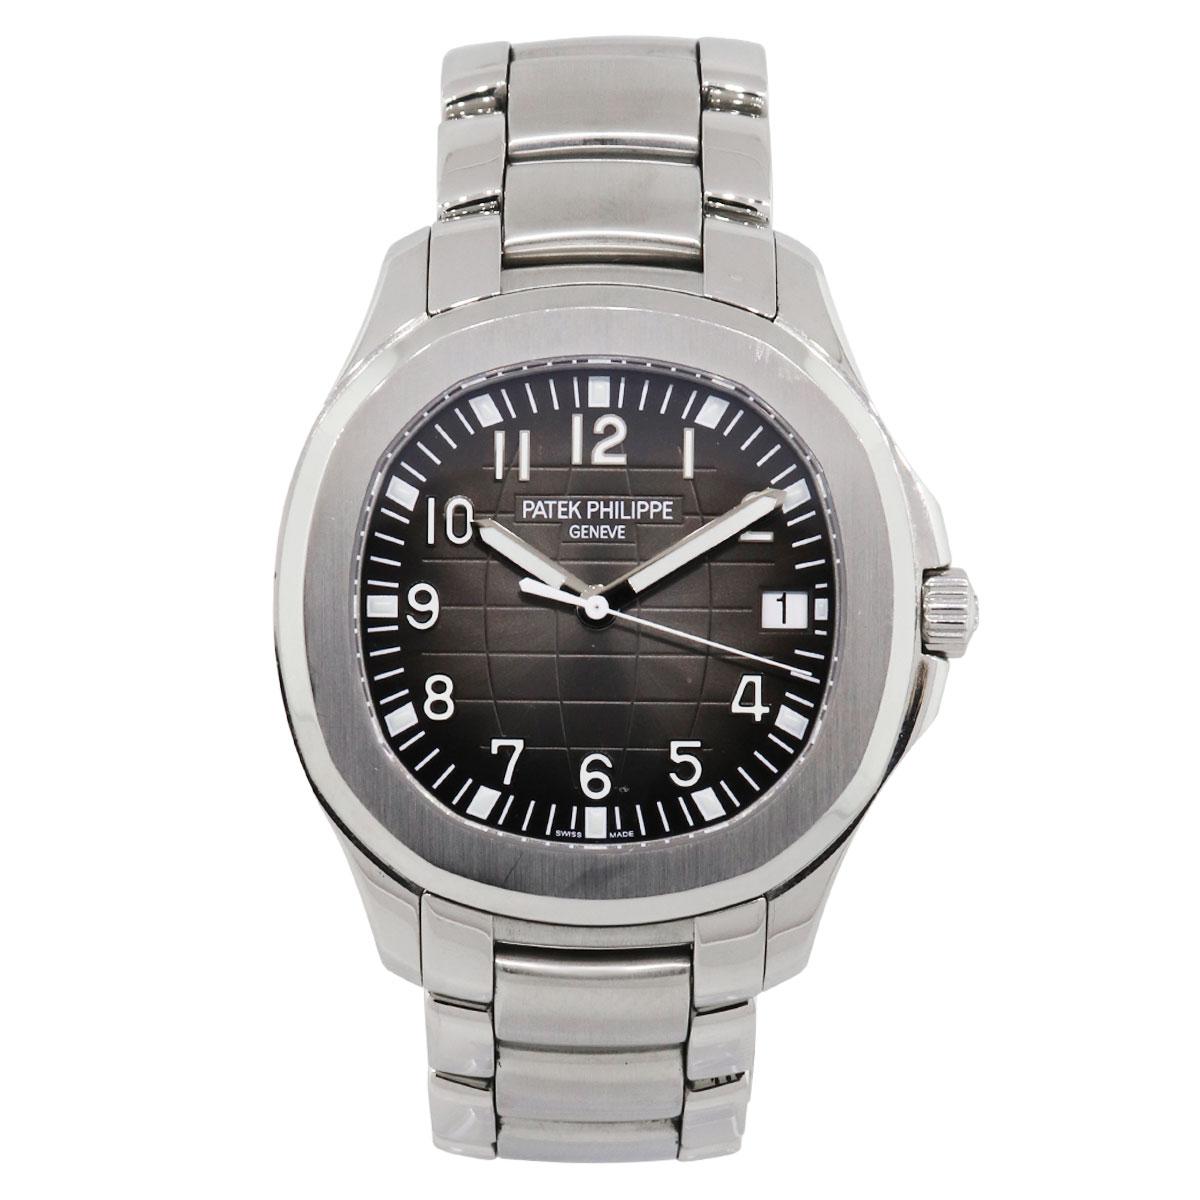 Brand: Patek Philippe
MPN: 5167A
Model: Aquanaut
Case Material: Stainless Steel
Crystal: Scratch resistant sapphire
Bezel: Brushed stainless steel bezel
Dial: Grey embossed dial with date displayed at 3 o’ clock.
Bracelet: Stainless steel
Size: Will